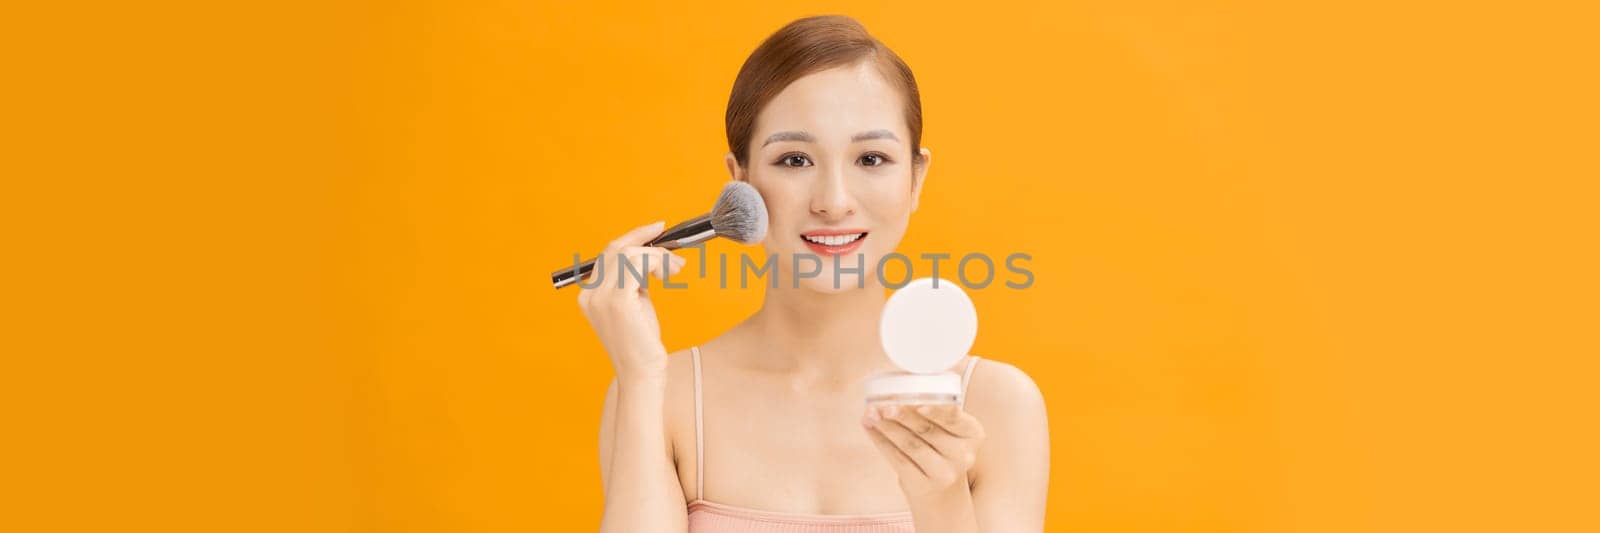 woman applying dry cosmetic tonal foundation on the face using makeup brush on banner background by makidotvn